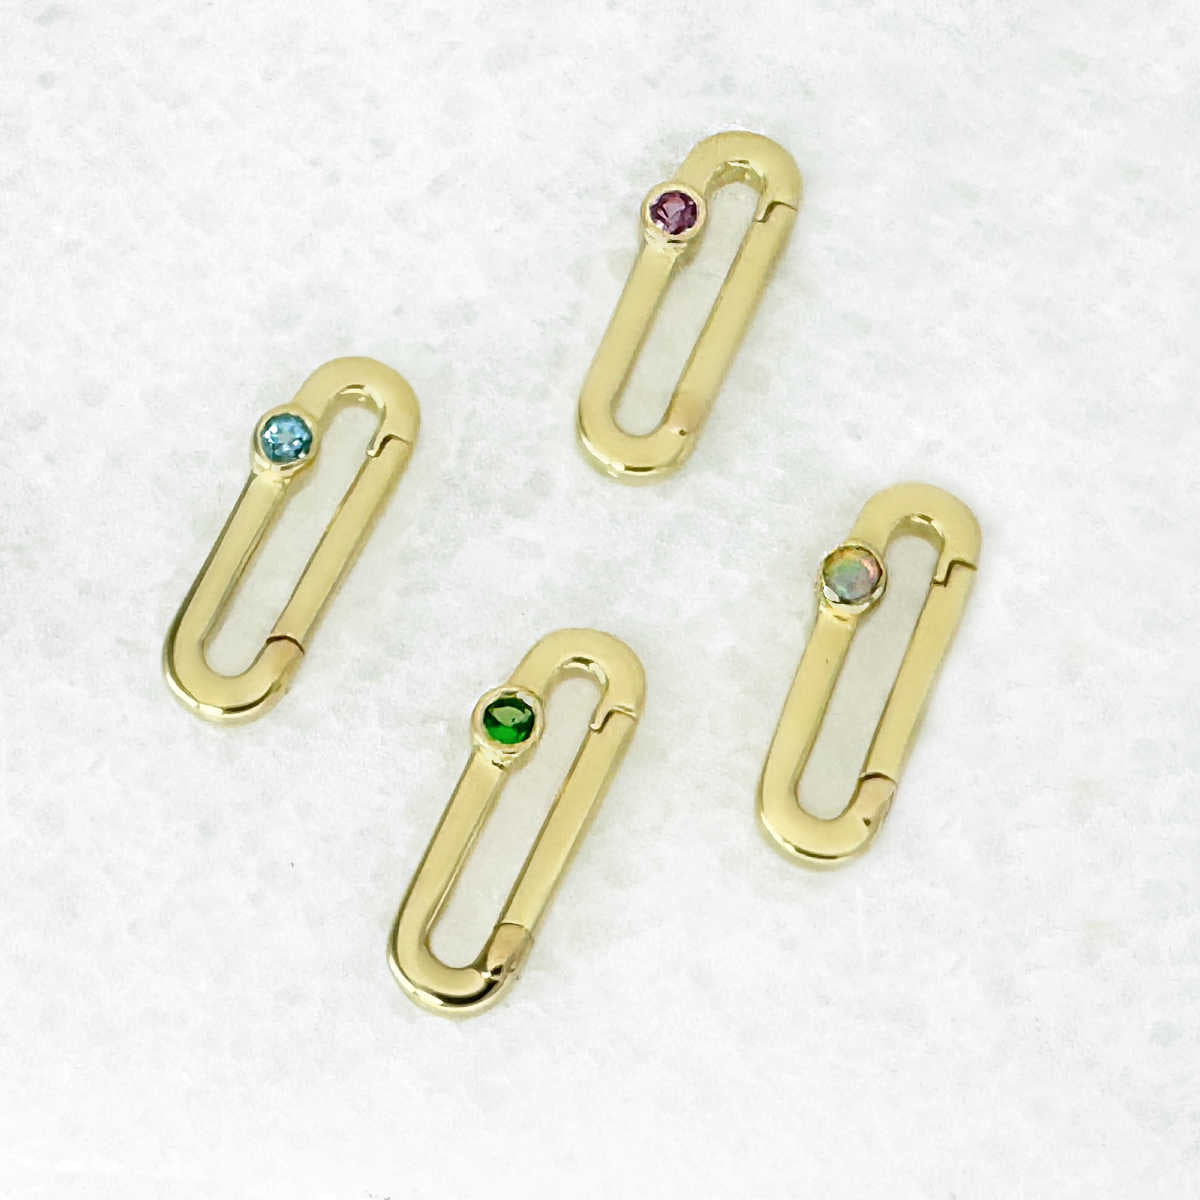 Solid Gold & Colored Gemstone Charm Holders, Chain Connector Clips from Two of Most